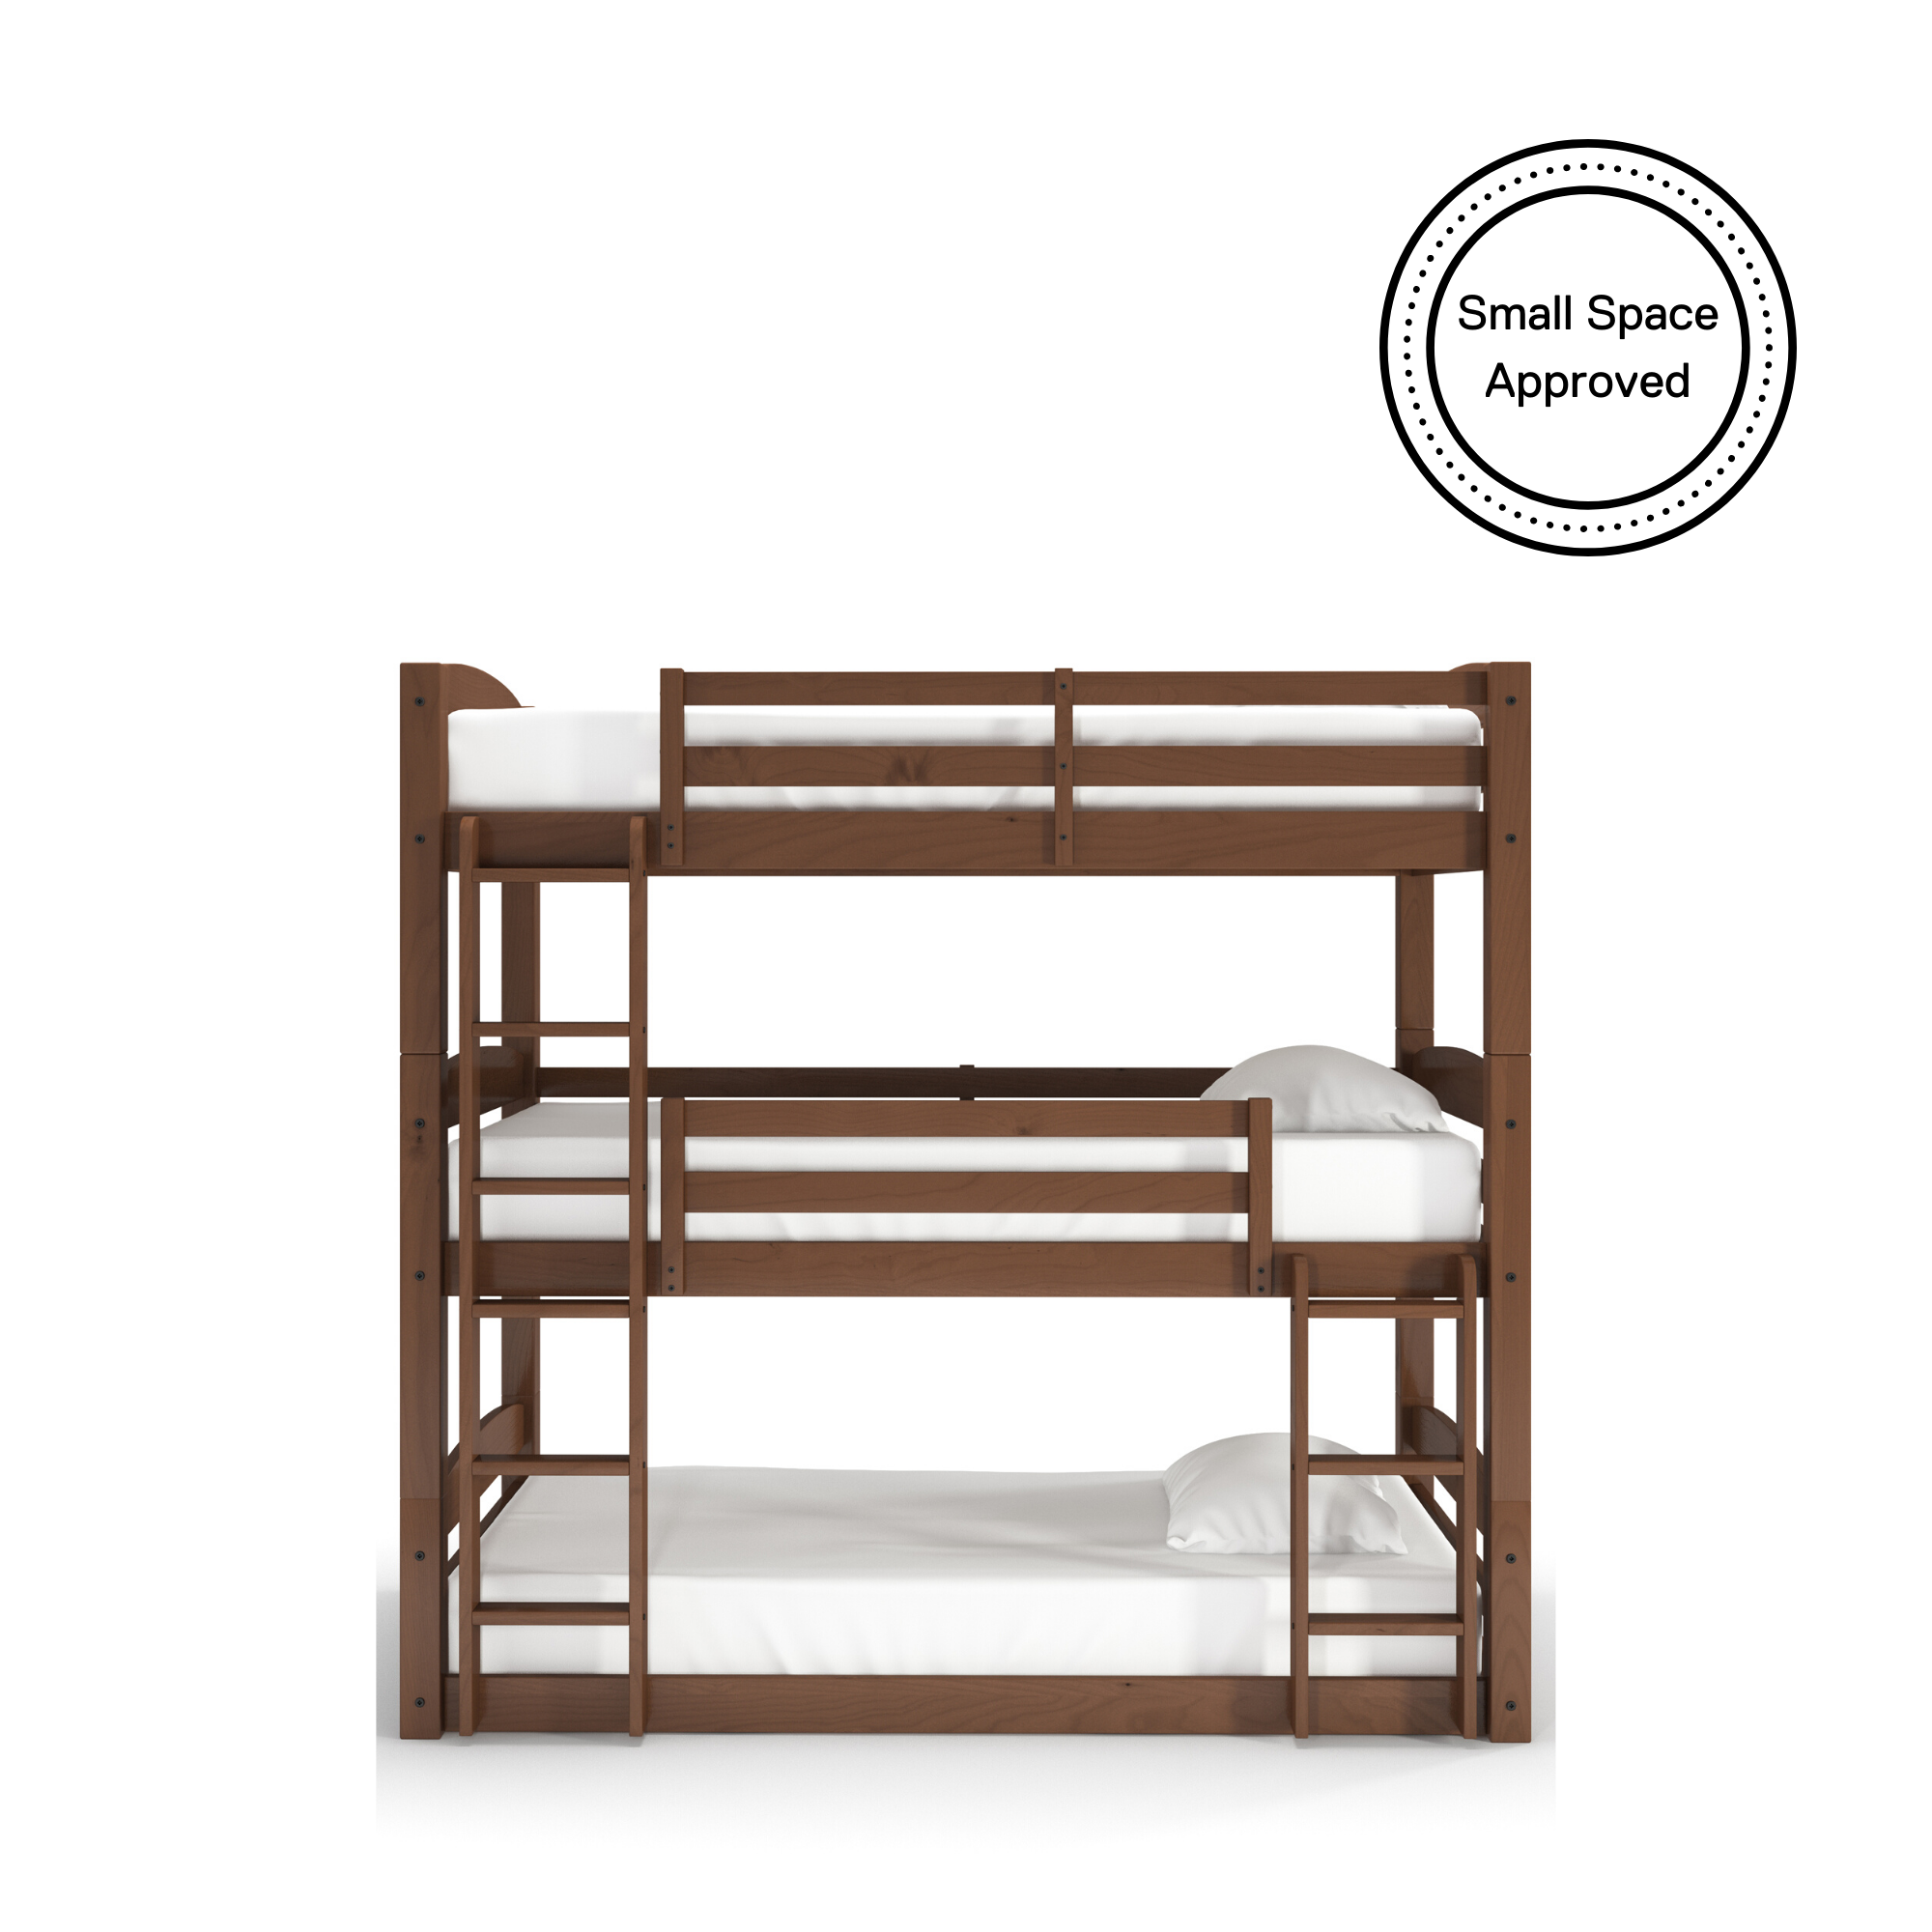 Better Homes & Gardens Tristan Kids' Convertible Triple Bunk Bed, Twin Over Twin Over Twin, Mocha - image 5 of 8